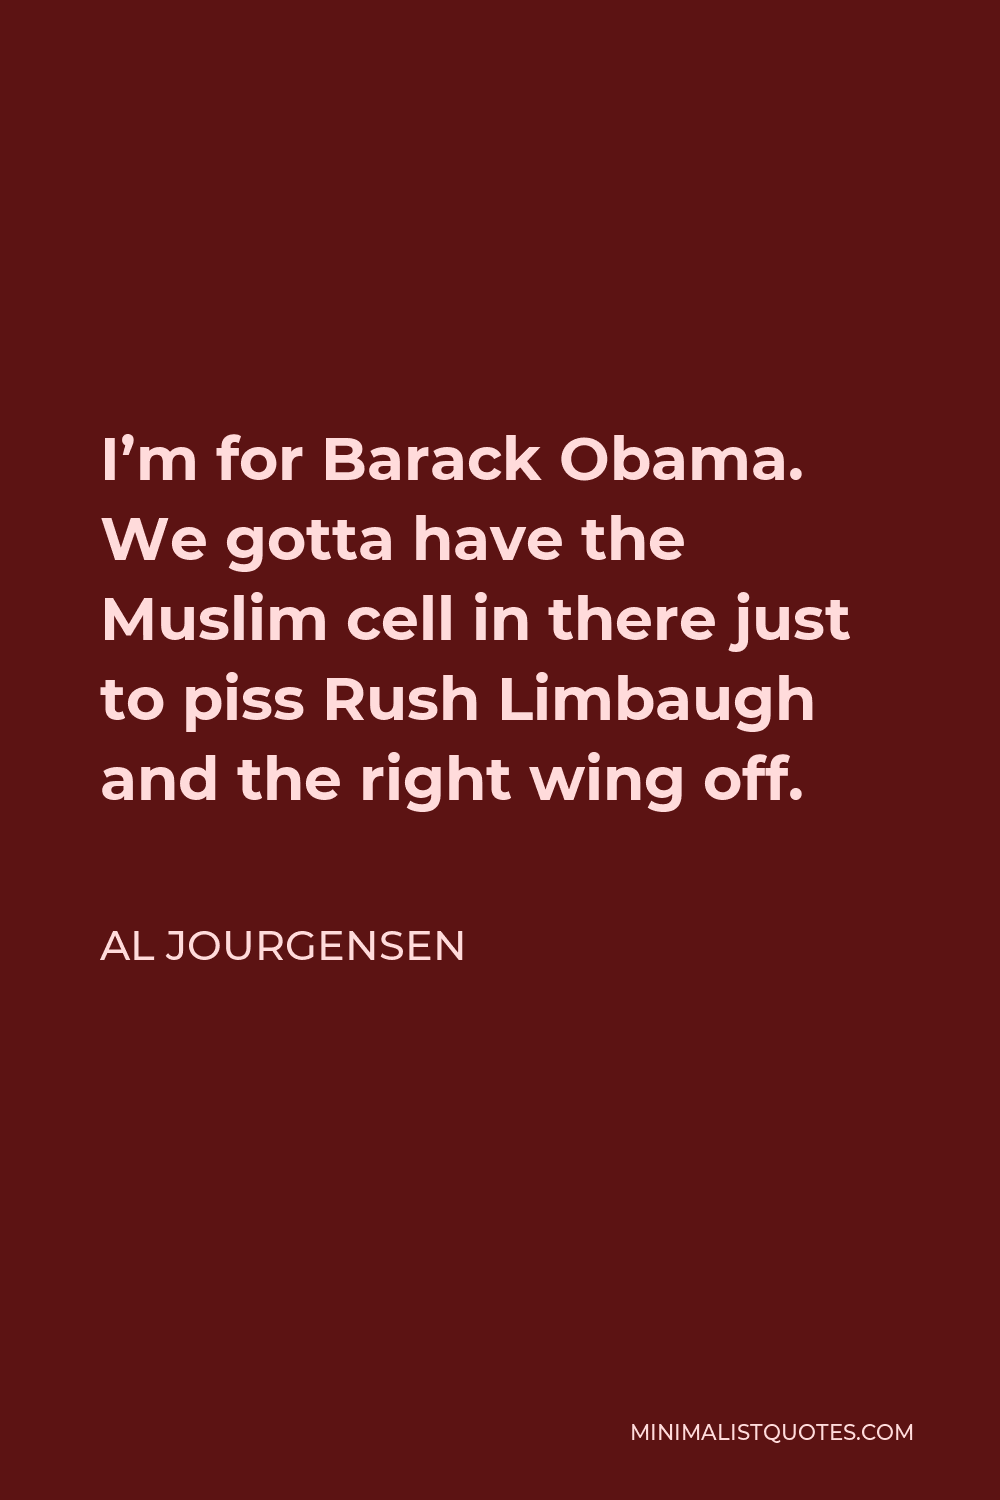 Al Jourgensen Quote - I’m for Barack Obama. We gotta have the Muslim cell in there just to piss Rush Limbaugh and the right wing off.